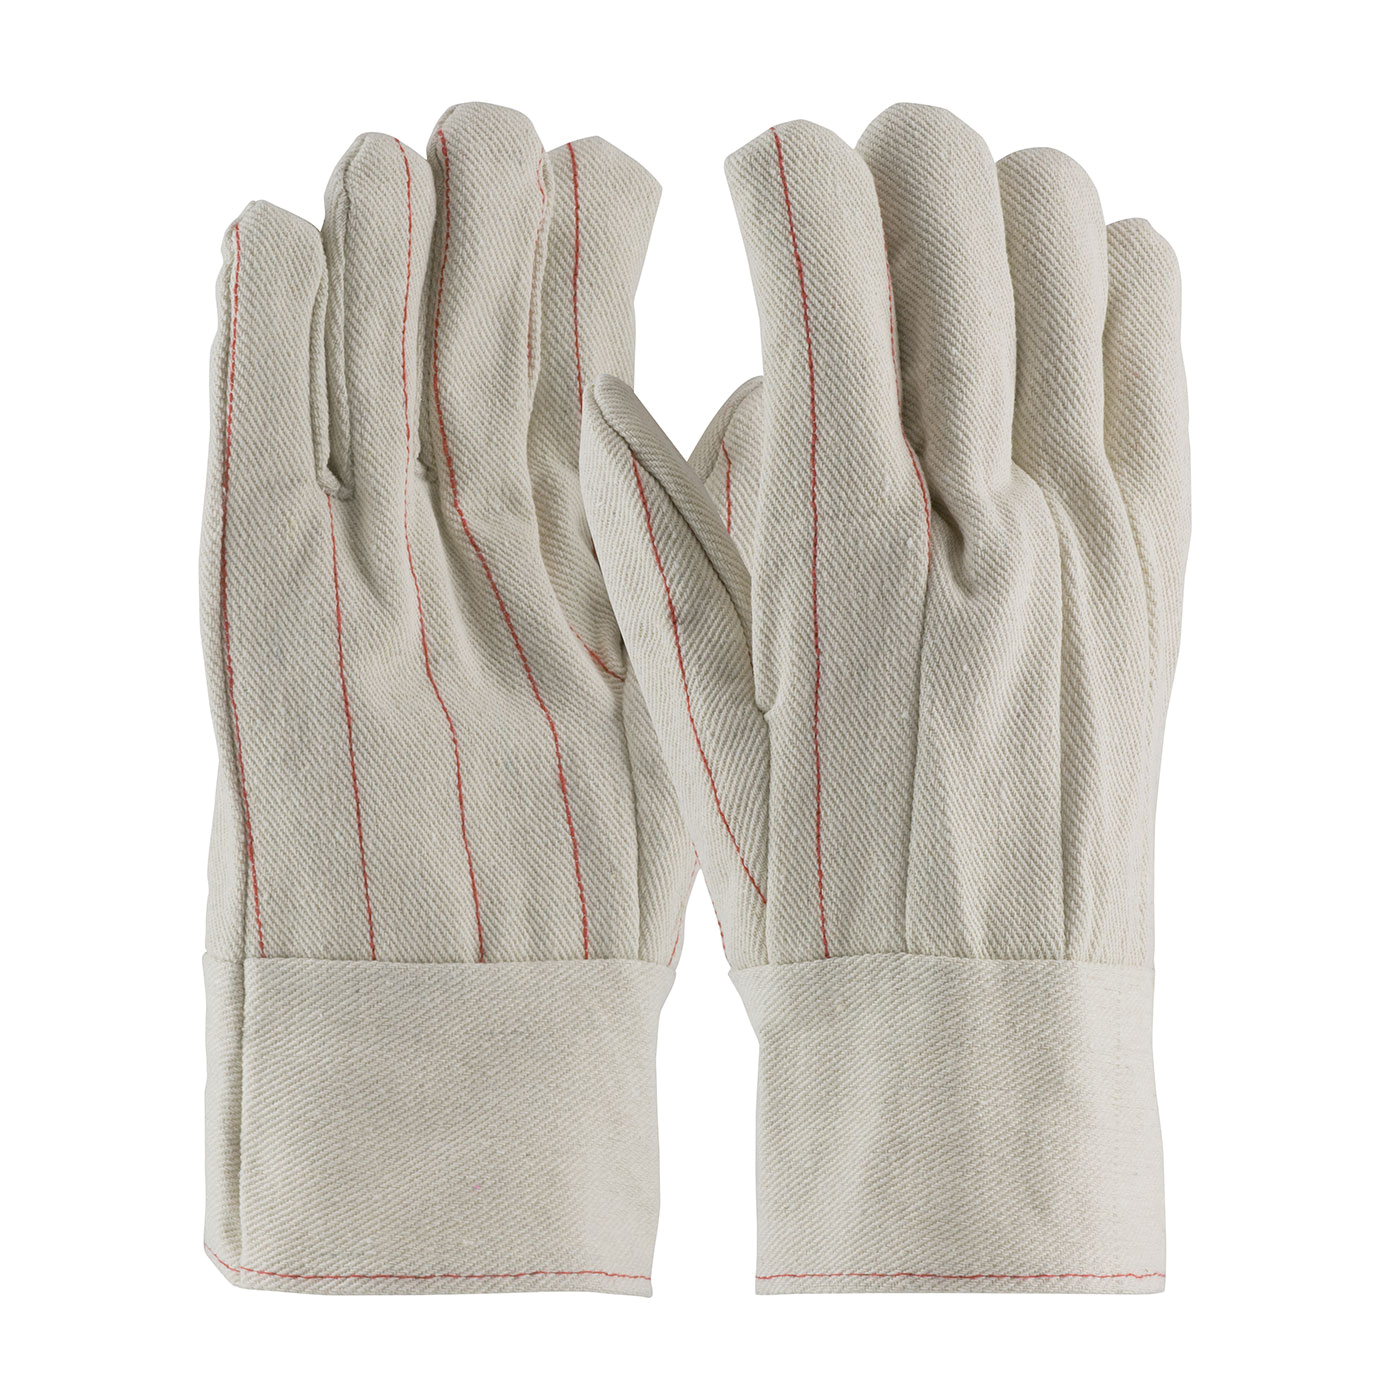 PIP® 92-918BT Double Palm Men's General Purpose Gloves, Multi-Purpose/Work, Clute Cut/Full Finger/Nap-In/Straight Thumb Style, Universal, Cotton Palm, Cotton Canvas, Natural, Band Top Cuff, Uncoated Coating, Resists: Abrasion, Cut, Canvas Lining